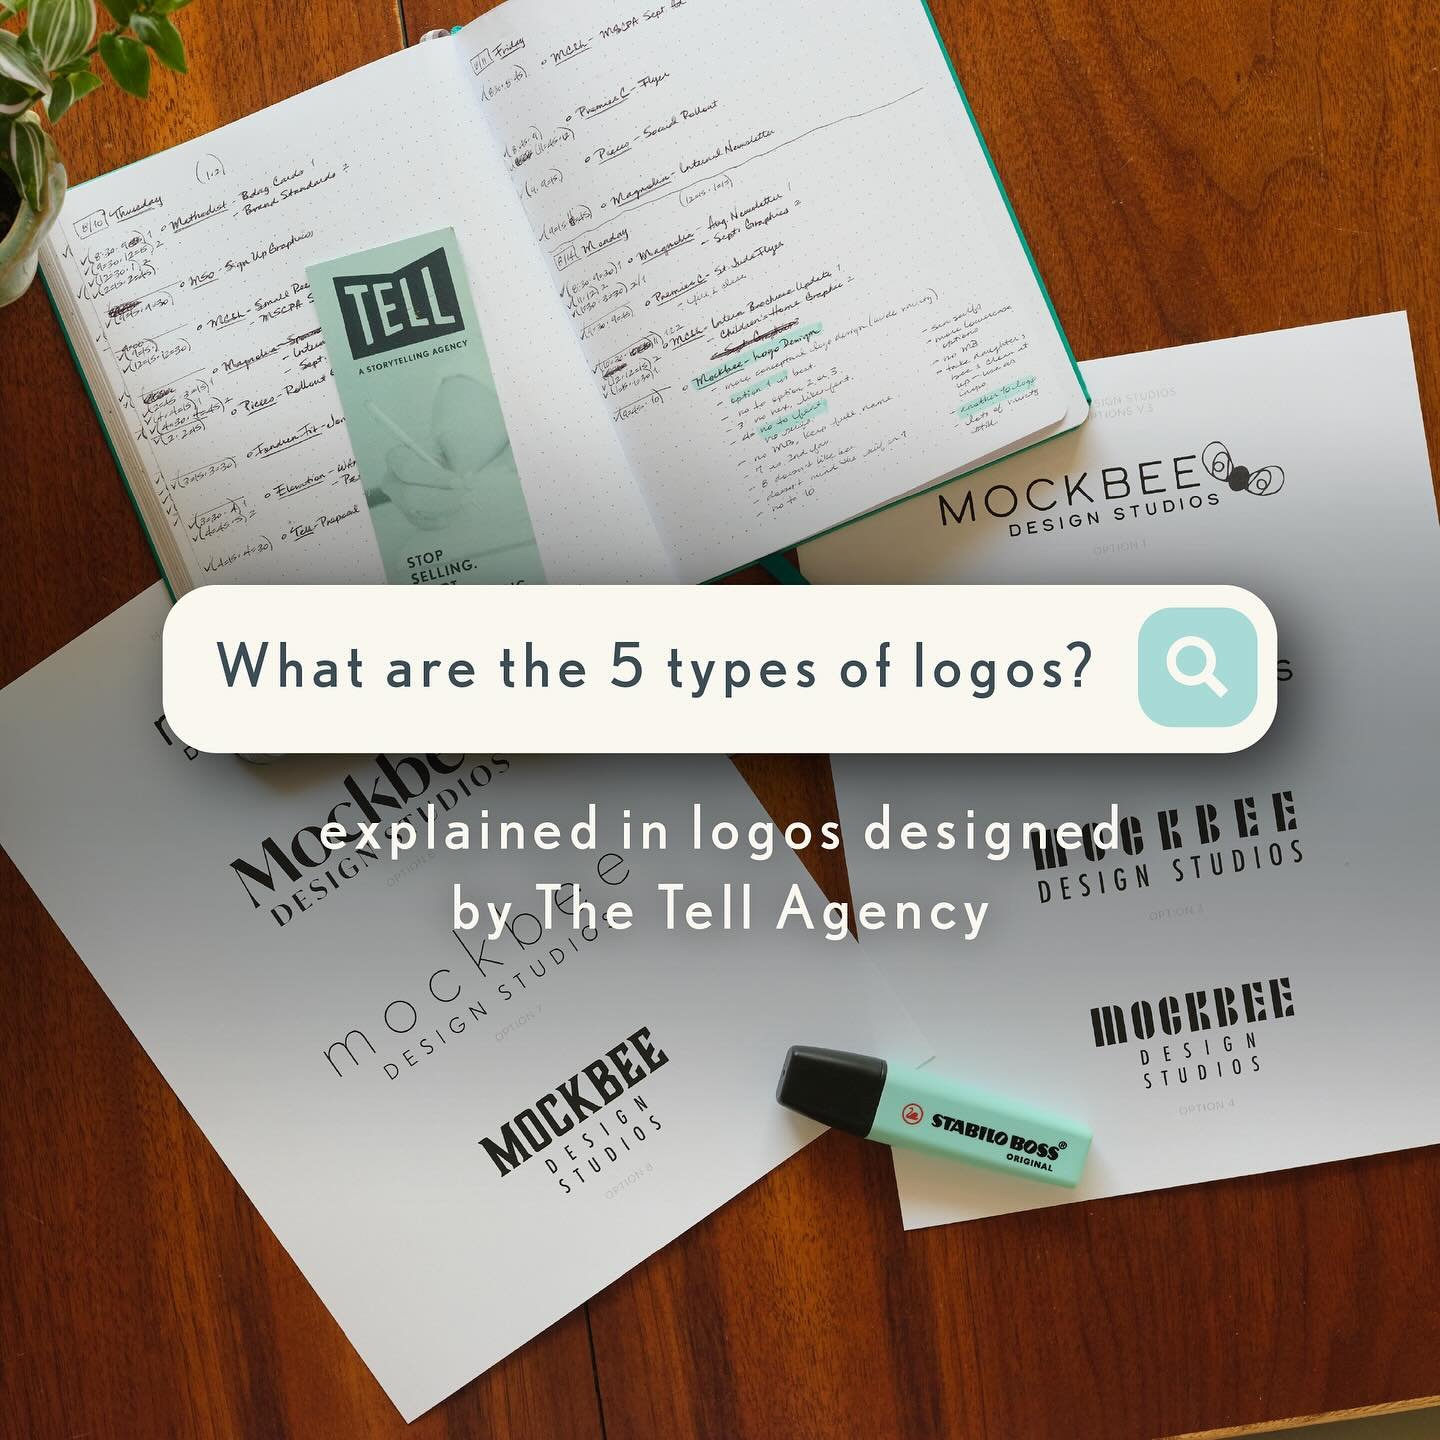 Your logo is more than just a visual&mdash;it&rsquo;s the cornerstone of your brand. While branding involves many elements, your logo sets the tone and style. With countless directions and styles to choose from, it&rsquo;s crucial to ensure your logo